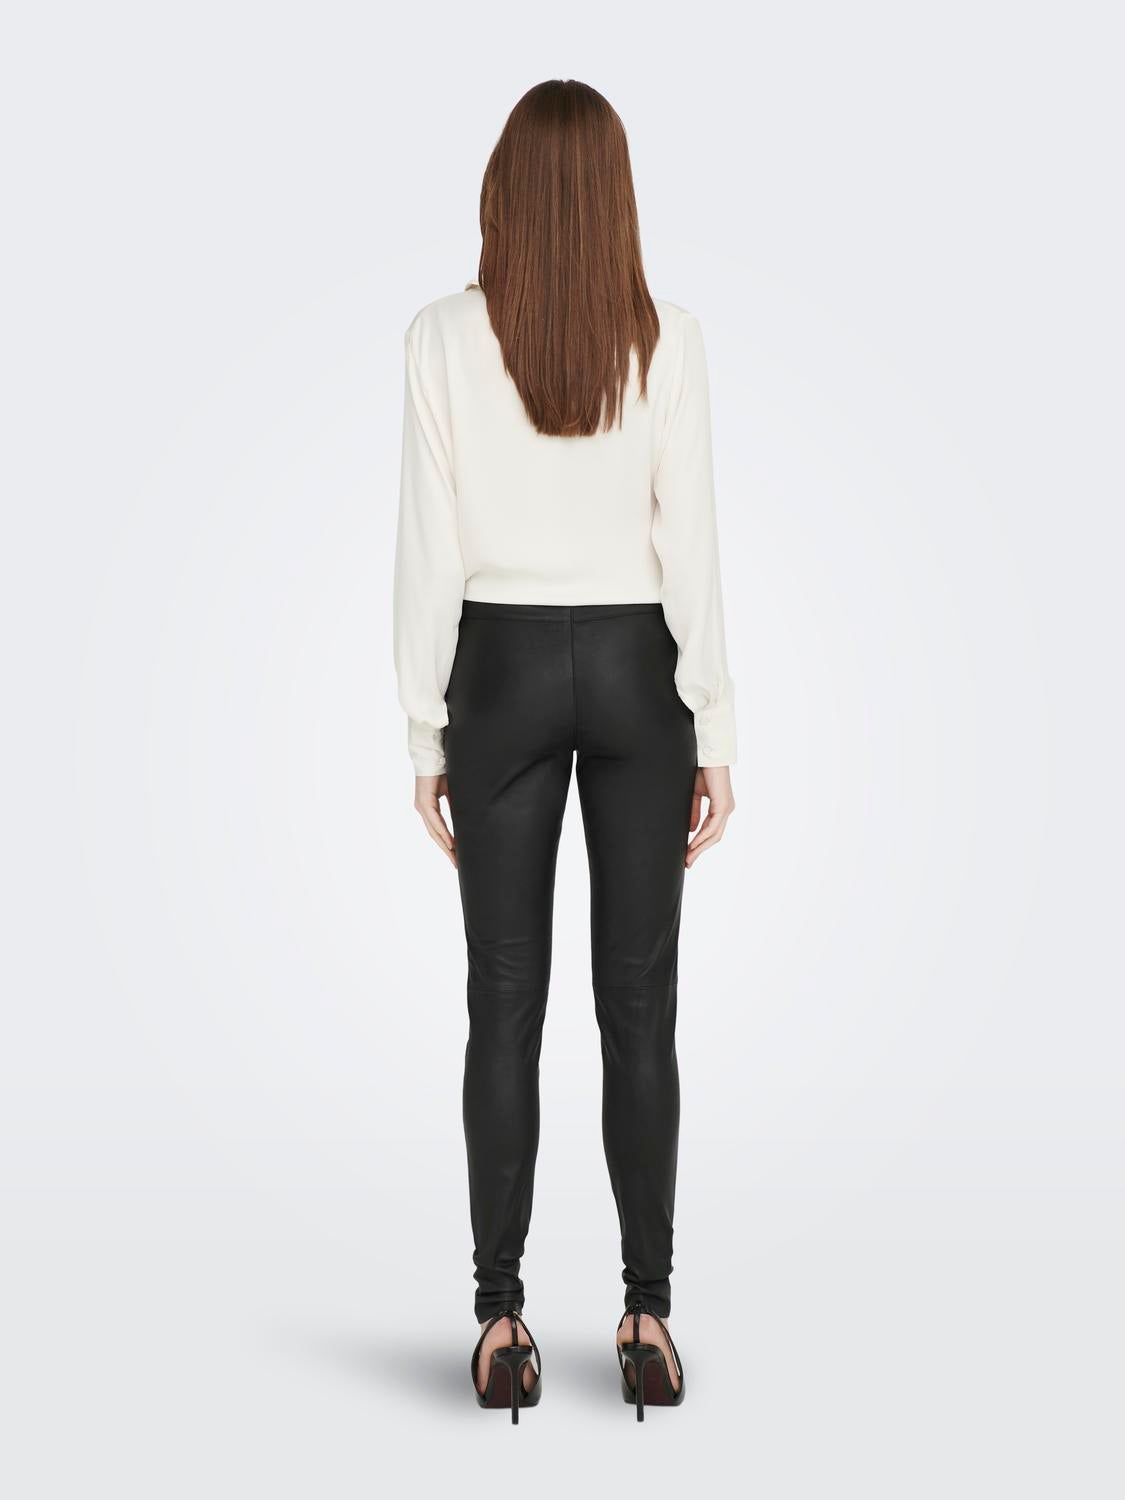 WRUP skinny push up faux leather trousers with high waist and zip   Freddy Official Store